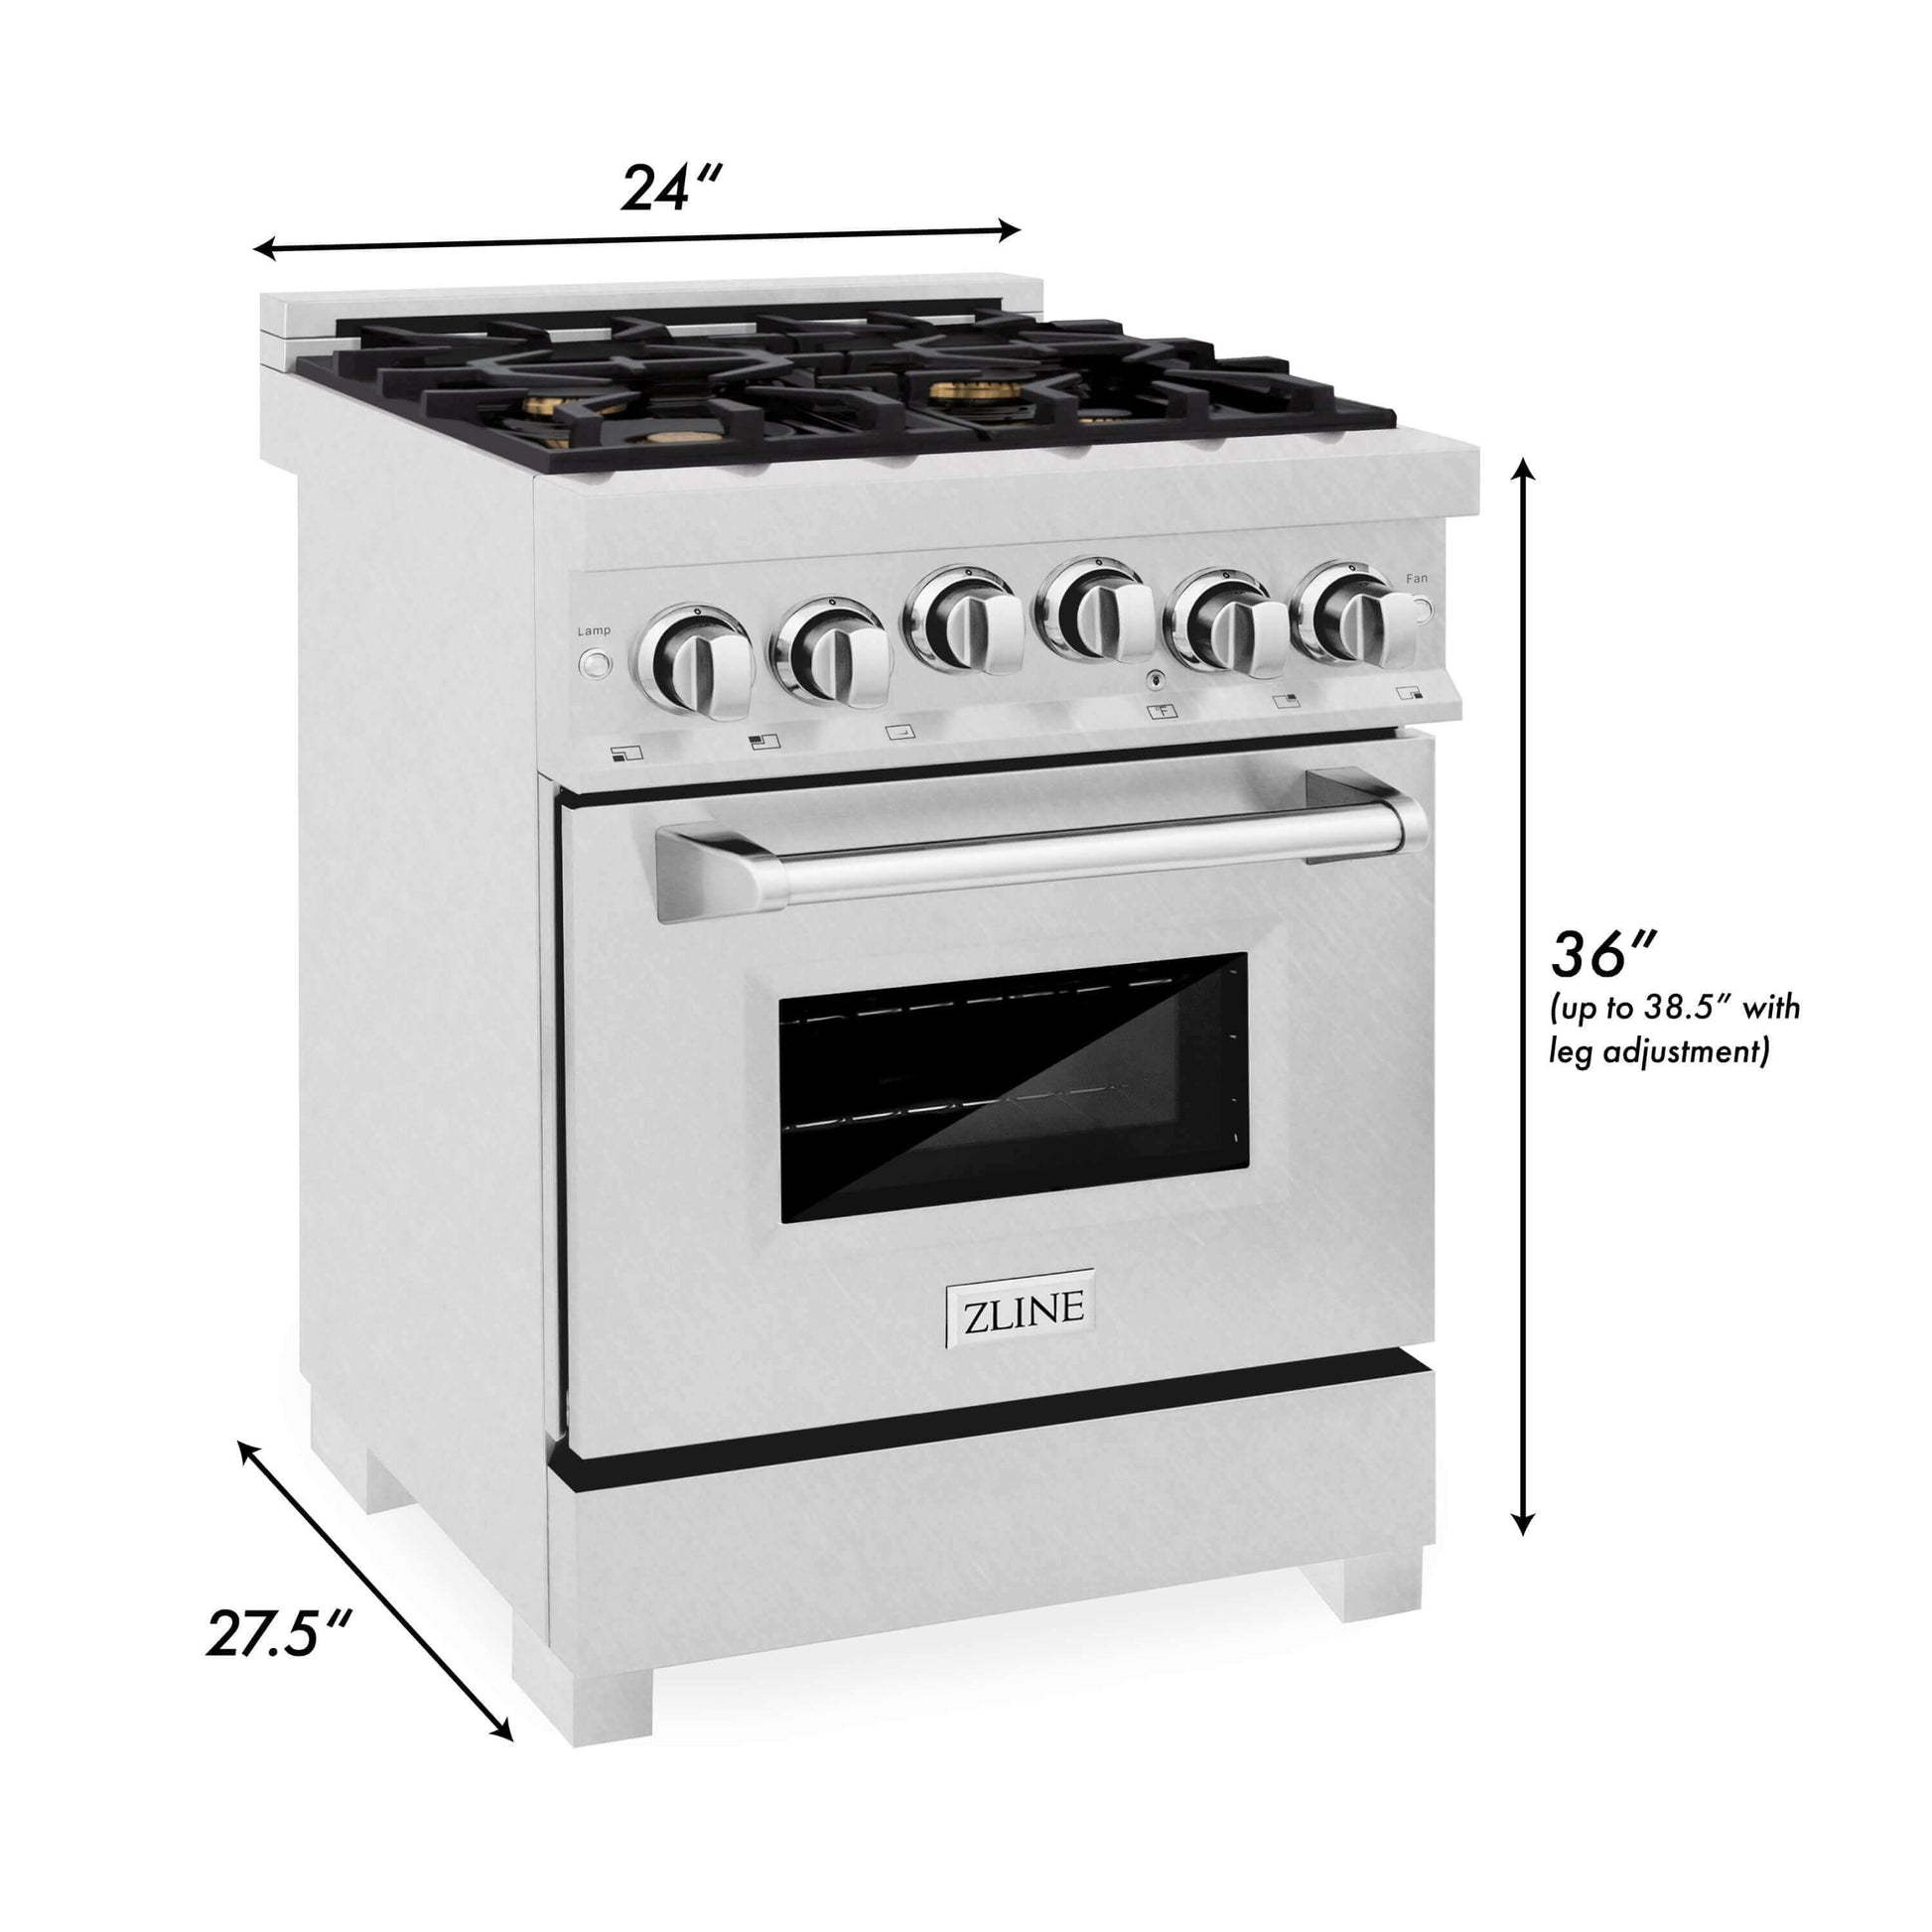 ZLINE 24" Range with Gas Stove and Gas Oven - Fingerprint Resistant Stainless Steel